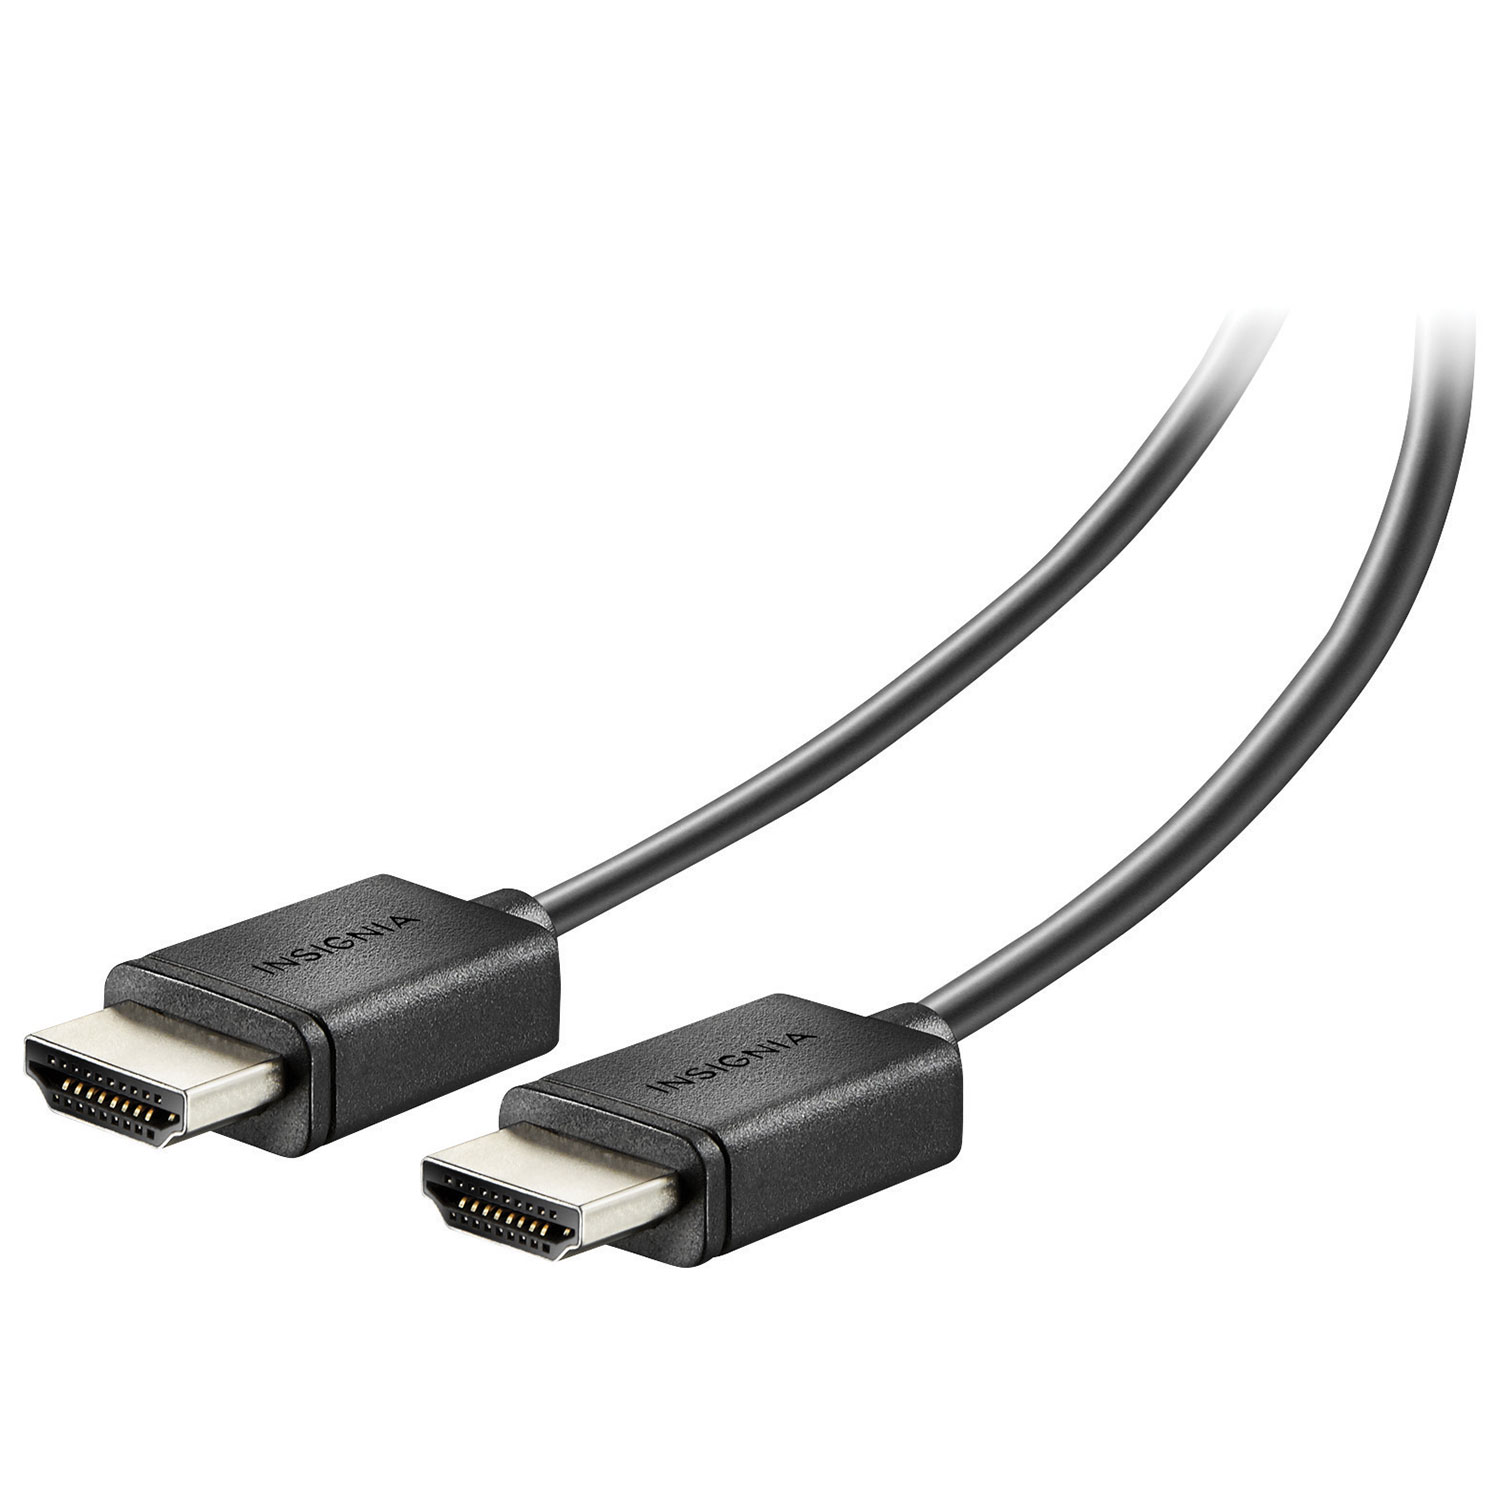 Insignia 2.74 (9 ft.) HDMI Cable - Black - Only at Best Buy